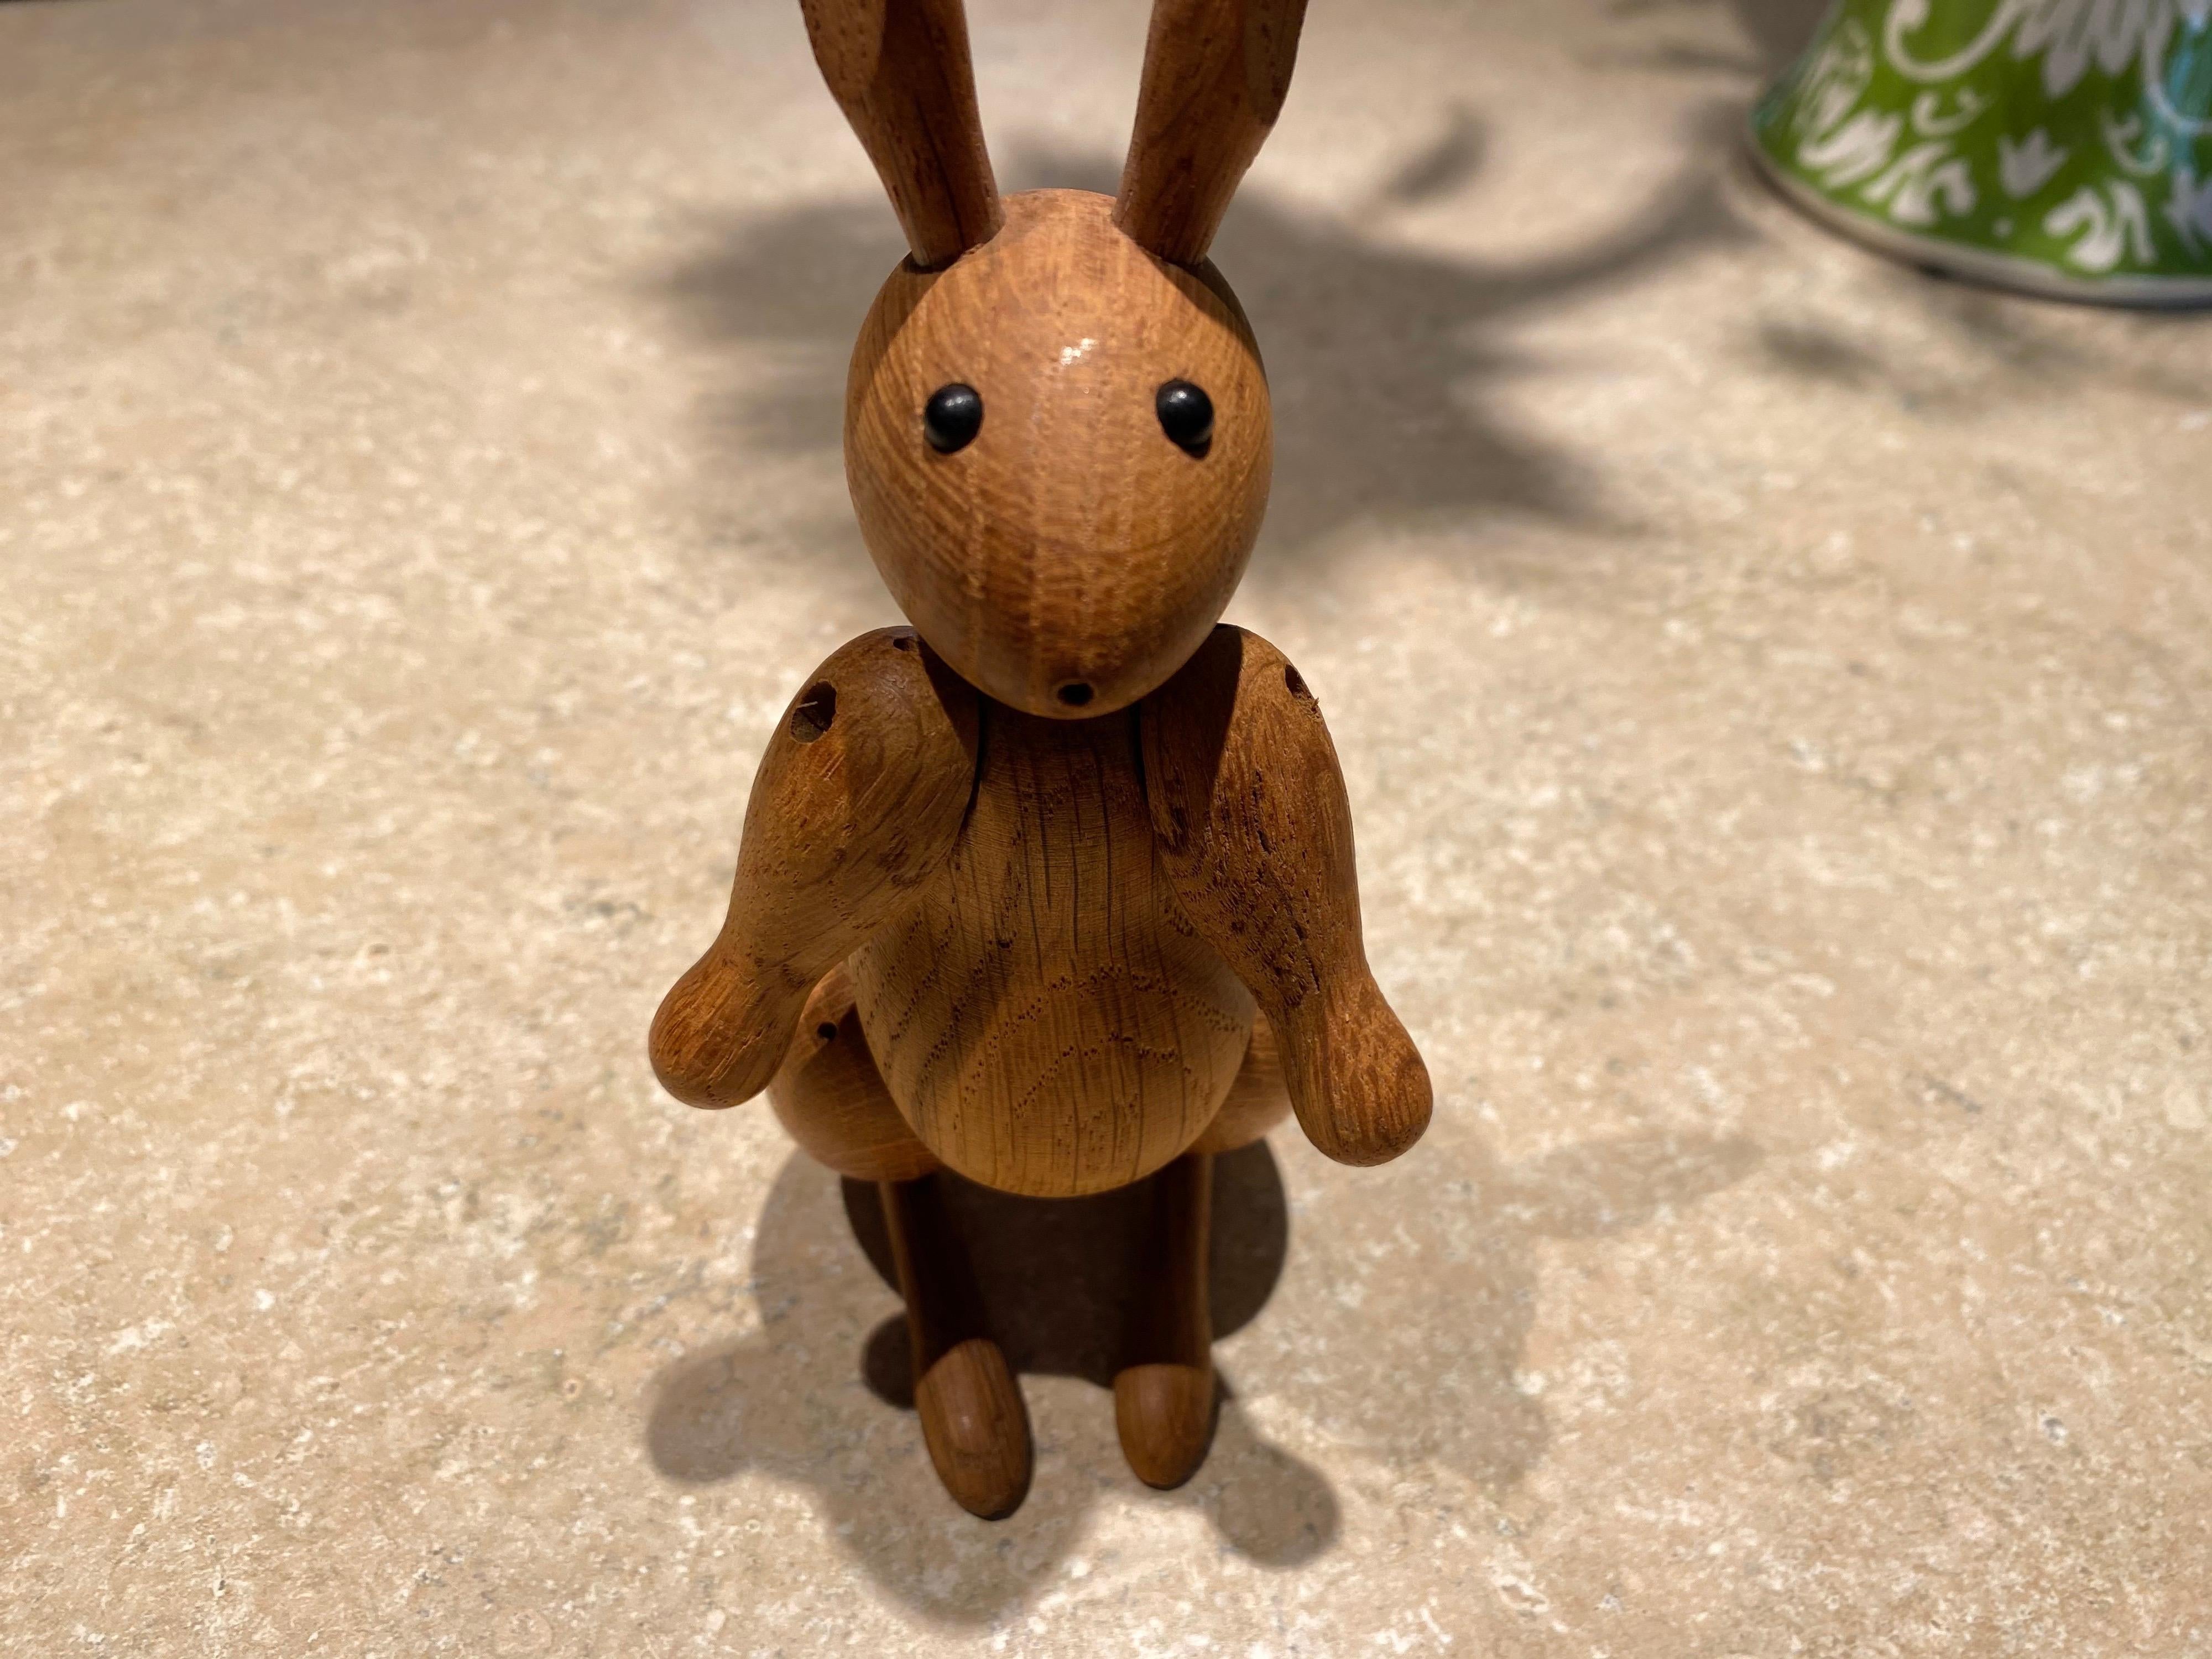 Original 1950's wooden oak rabbit designed by silversmith and designer Kay Bojesen. This adorable piece is in great overall condition.